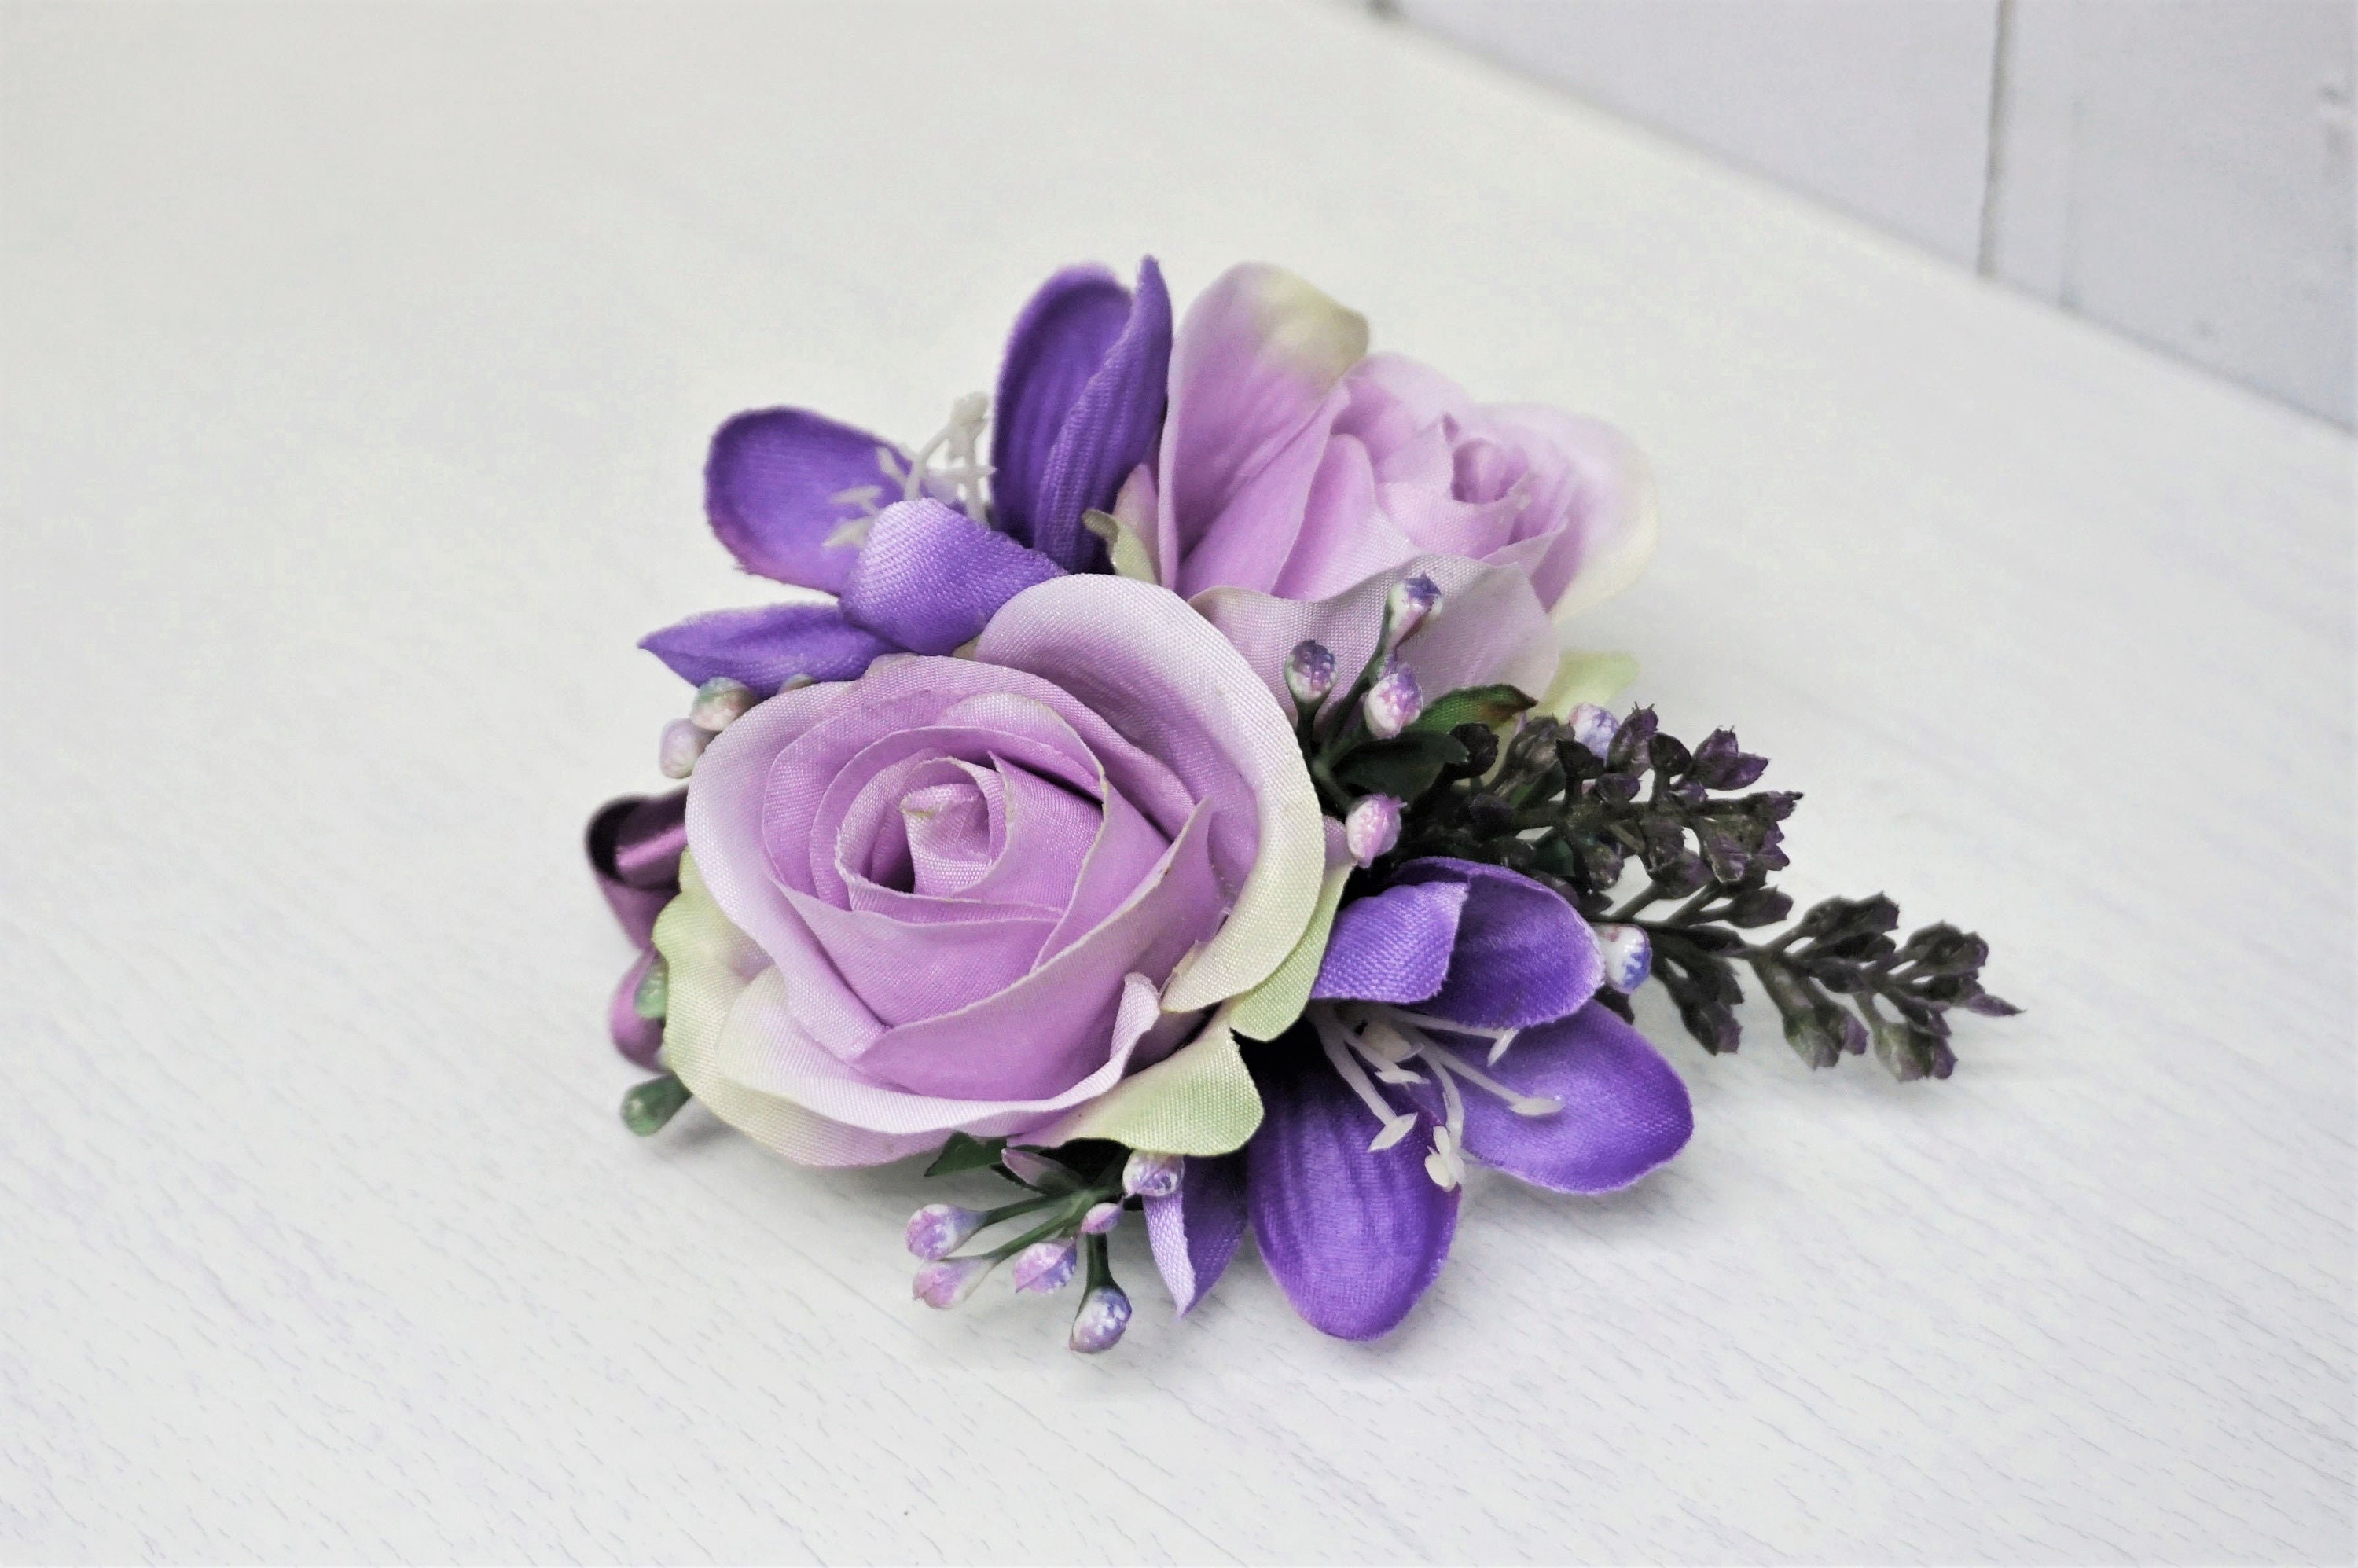 Lavender and Silver wrist corsage and magnet boutonniere in Pratt, KS